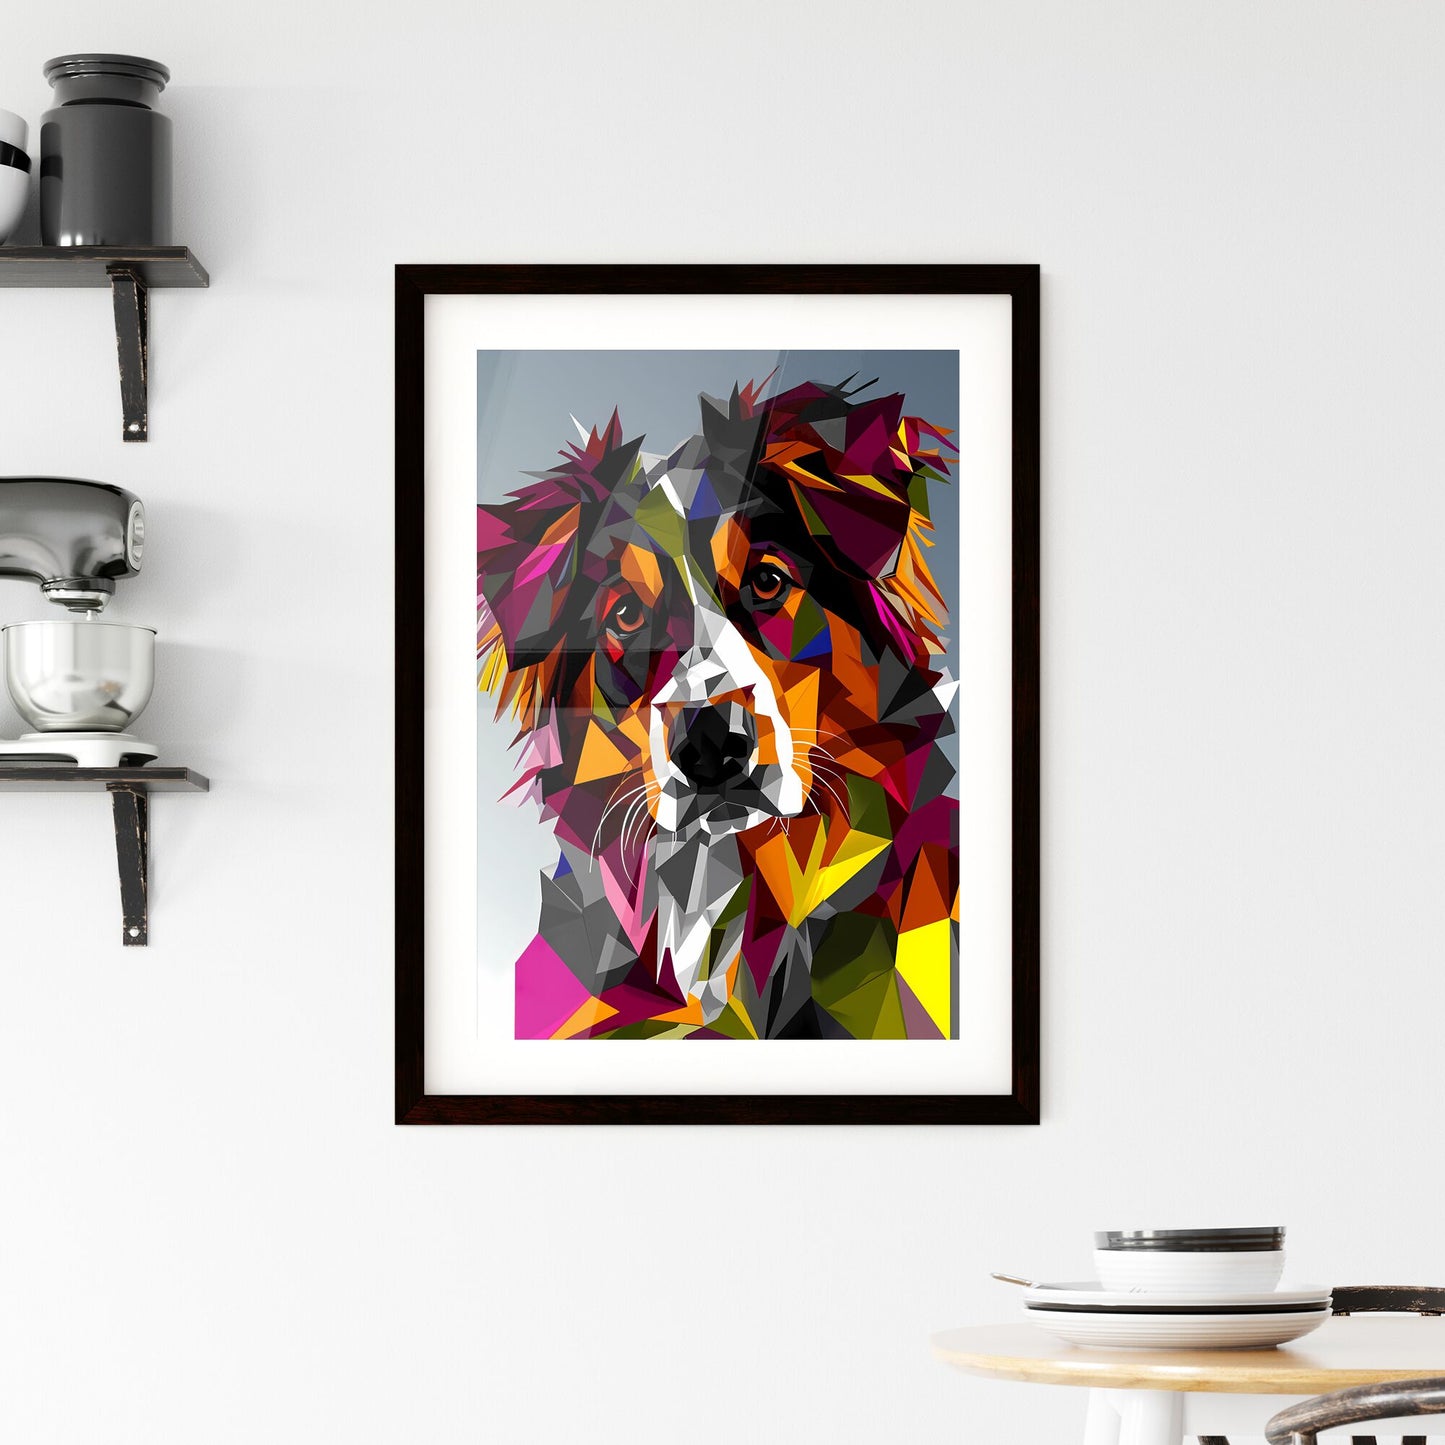 A Poster of two dogs holding each other - A Colorful Dog With White And Black Face Default Title